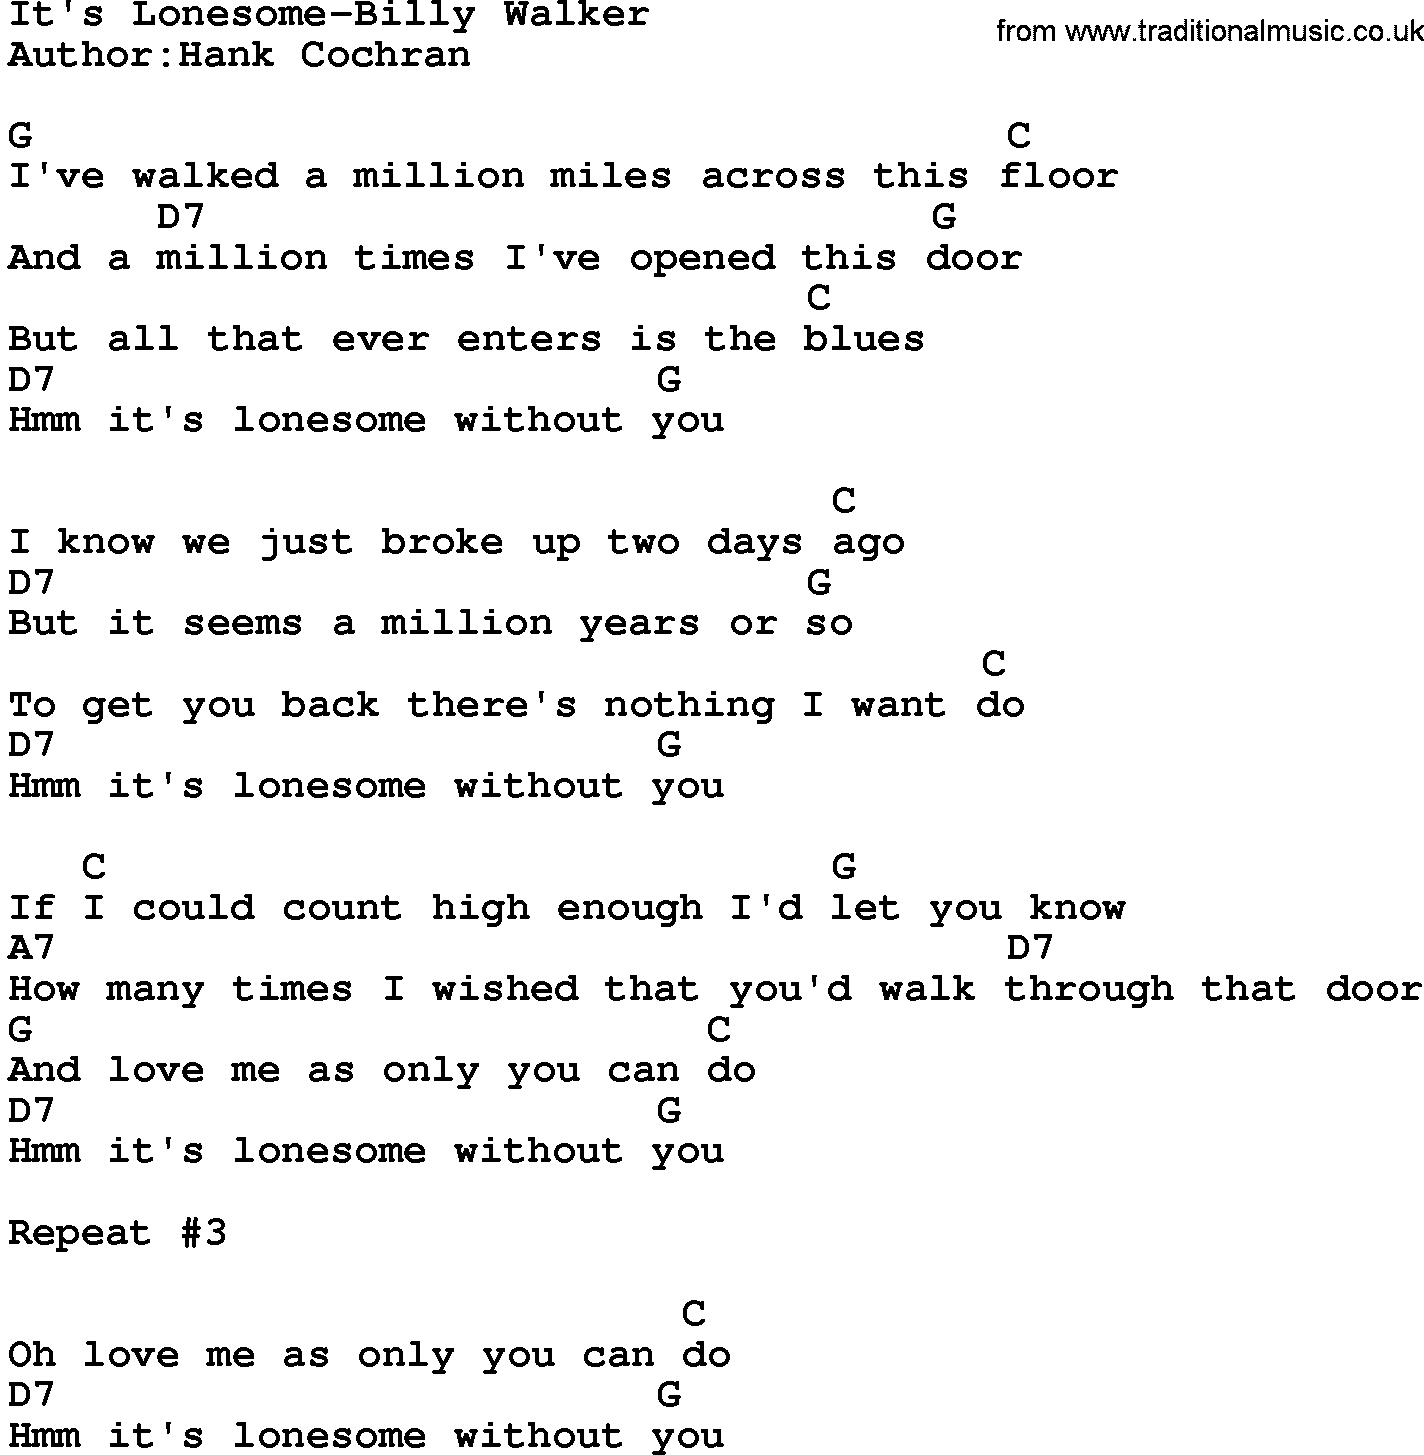 Country music song: It's Lonesome-Billy Walker lyrics and chords